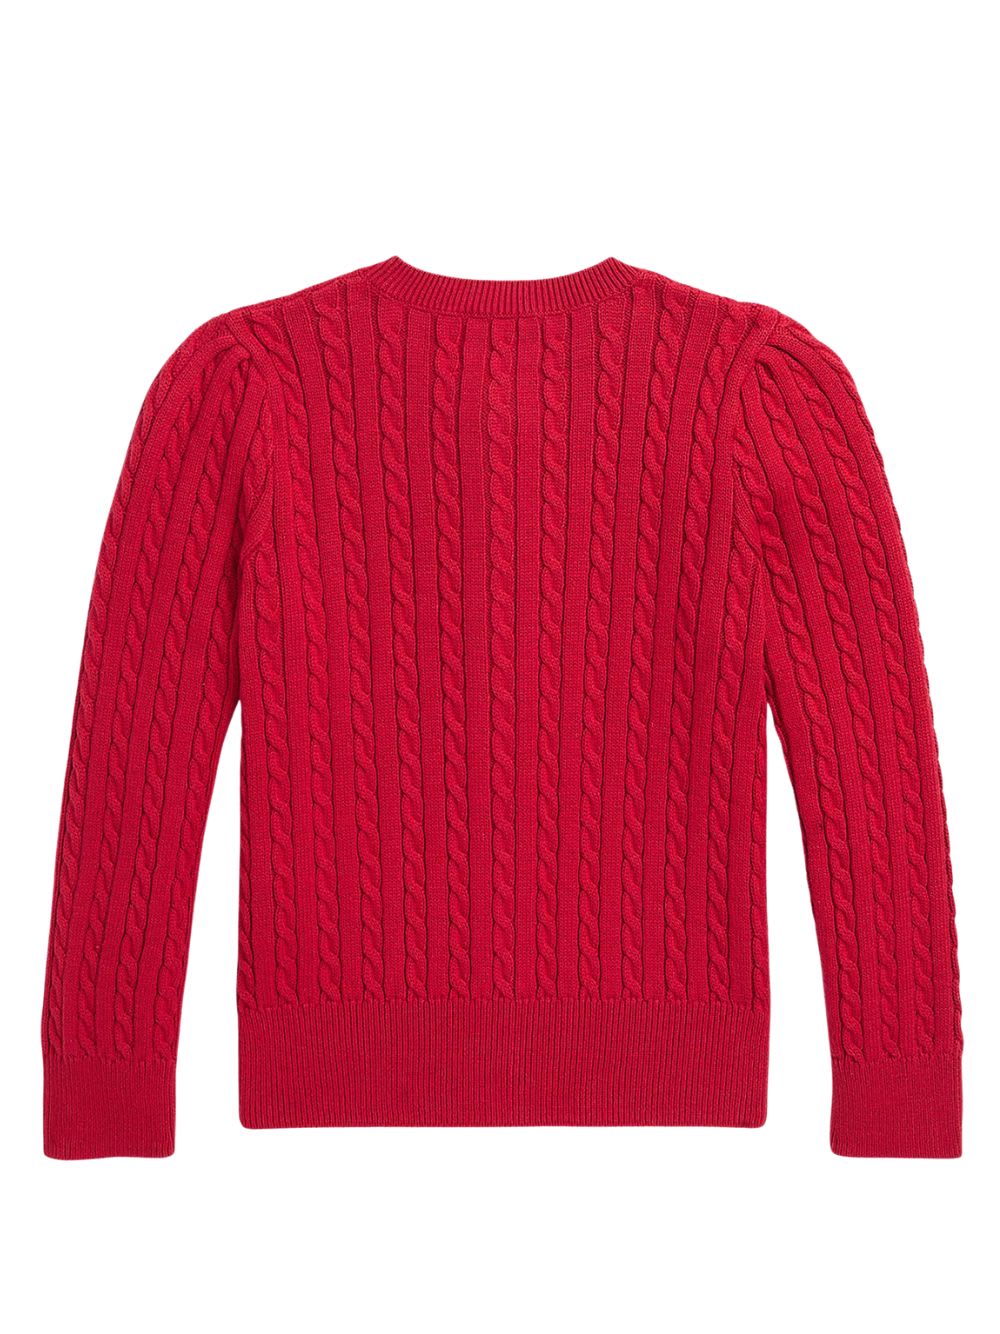 Shop Polo Ralph Lauren Minicablbear Sweater Cardigan In Park Ave Red